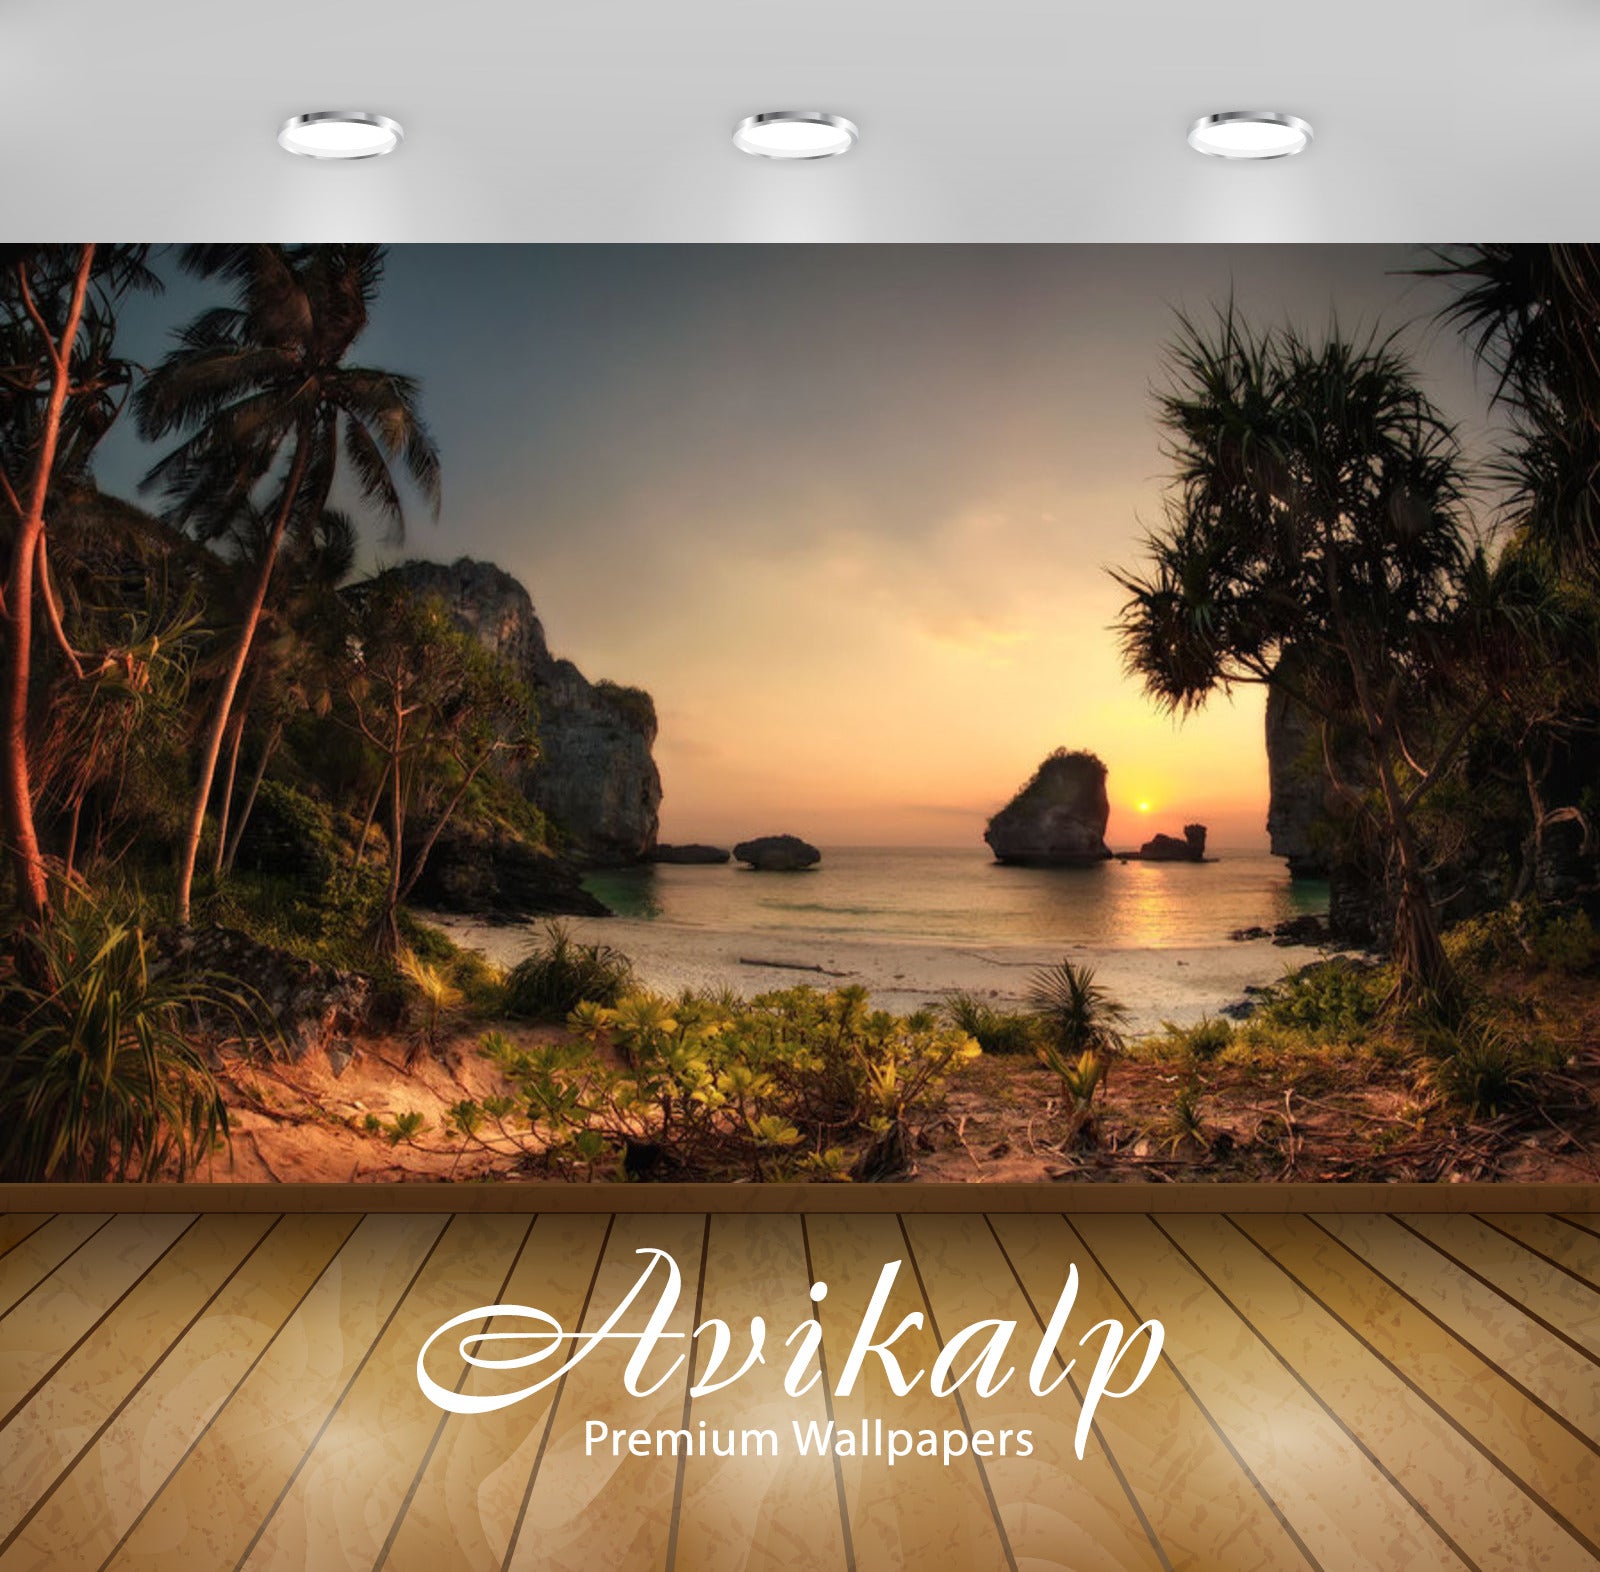 Avikalp Exclusive Awi1297 Beach View Full HD Wallpapers for Living room, Hall, Kids Room, Kitchen, T